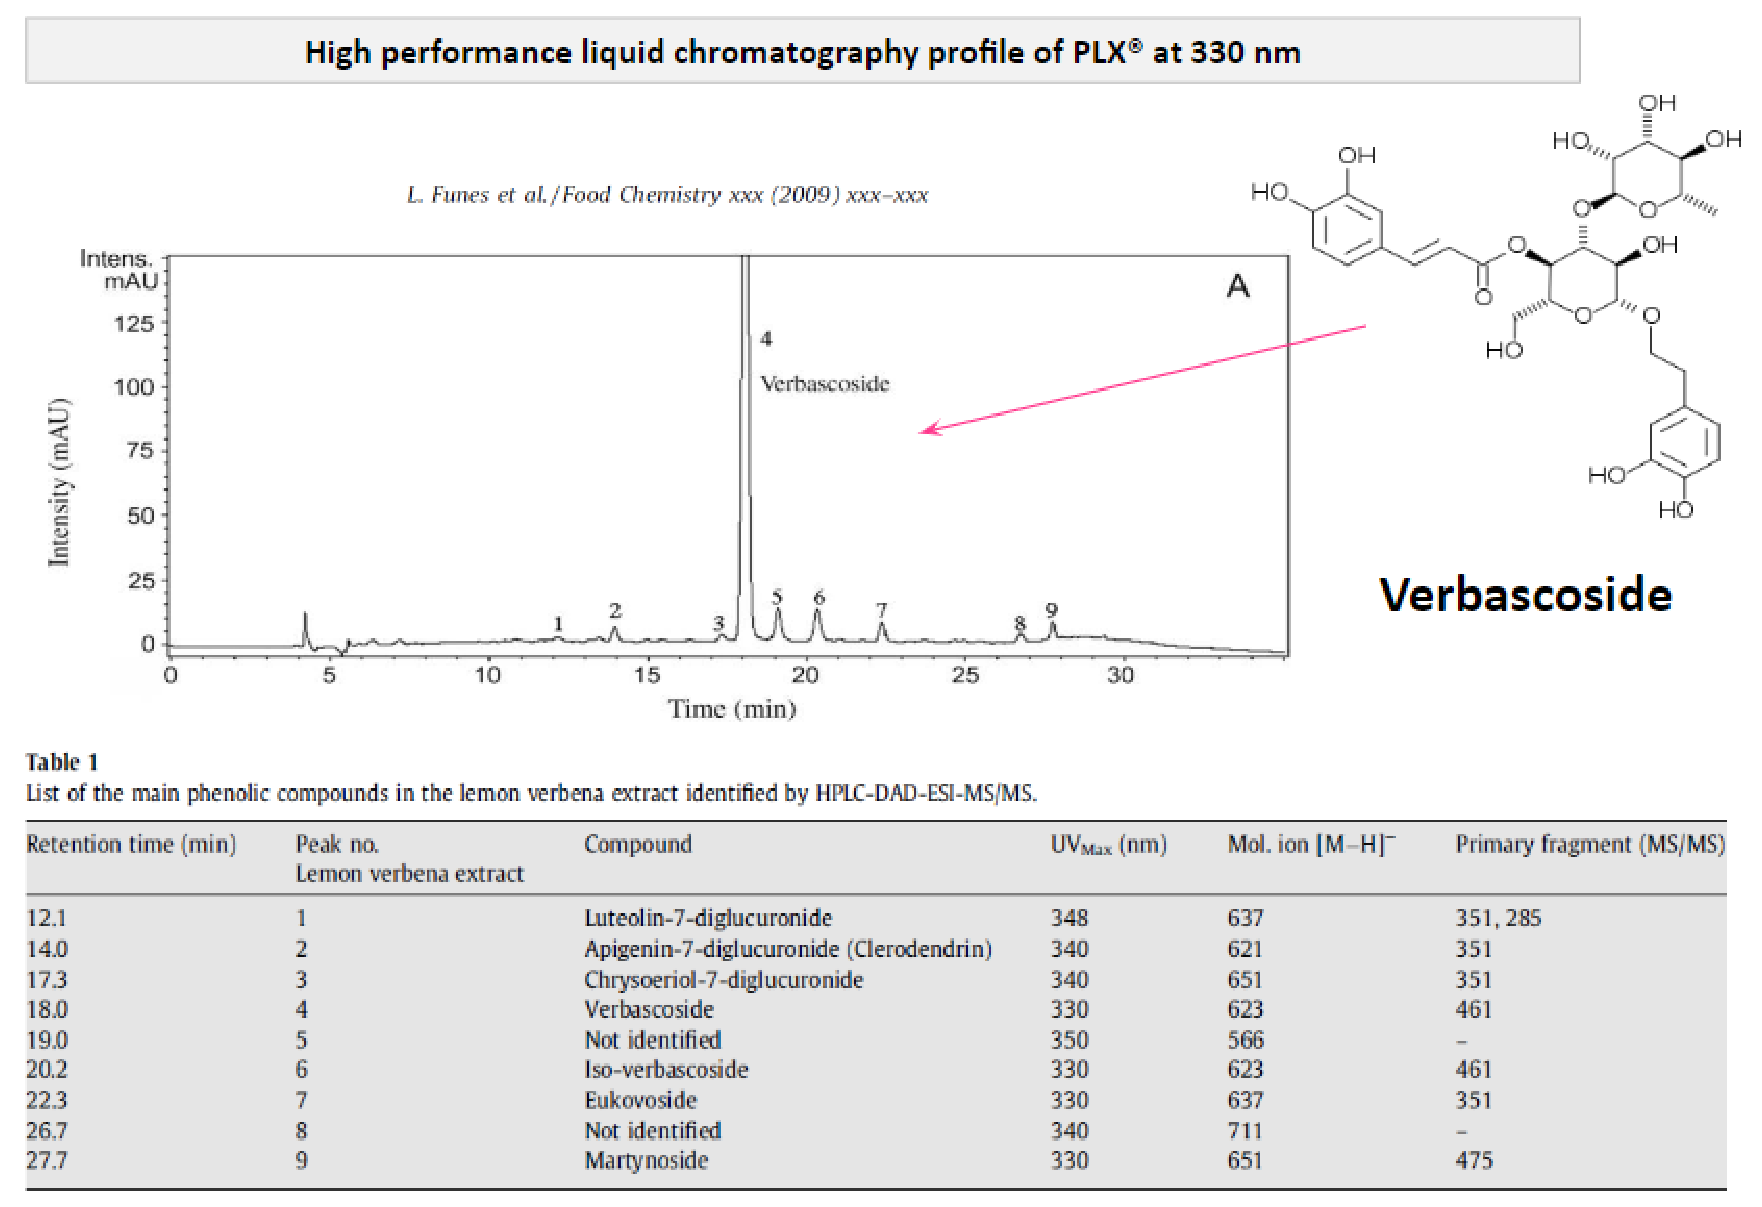 Funes et al. (2009) characterized move!plx® using high-performance liquid chromatography (HPLC). move!plx® contains 25% of verbascosides